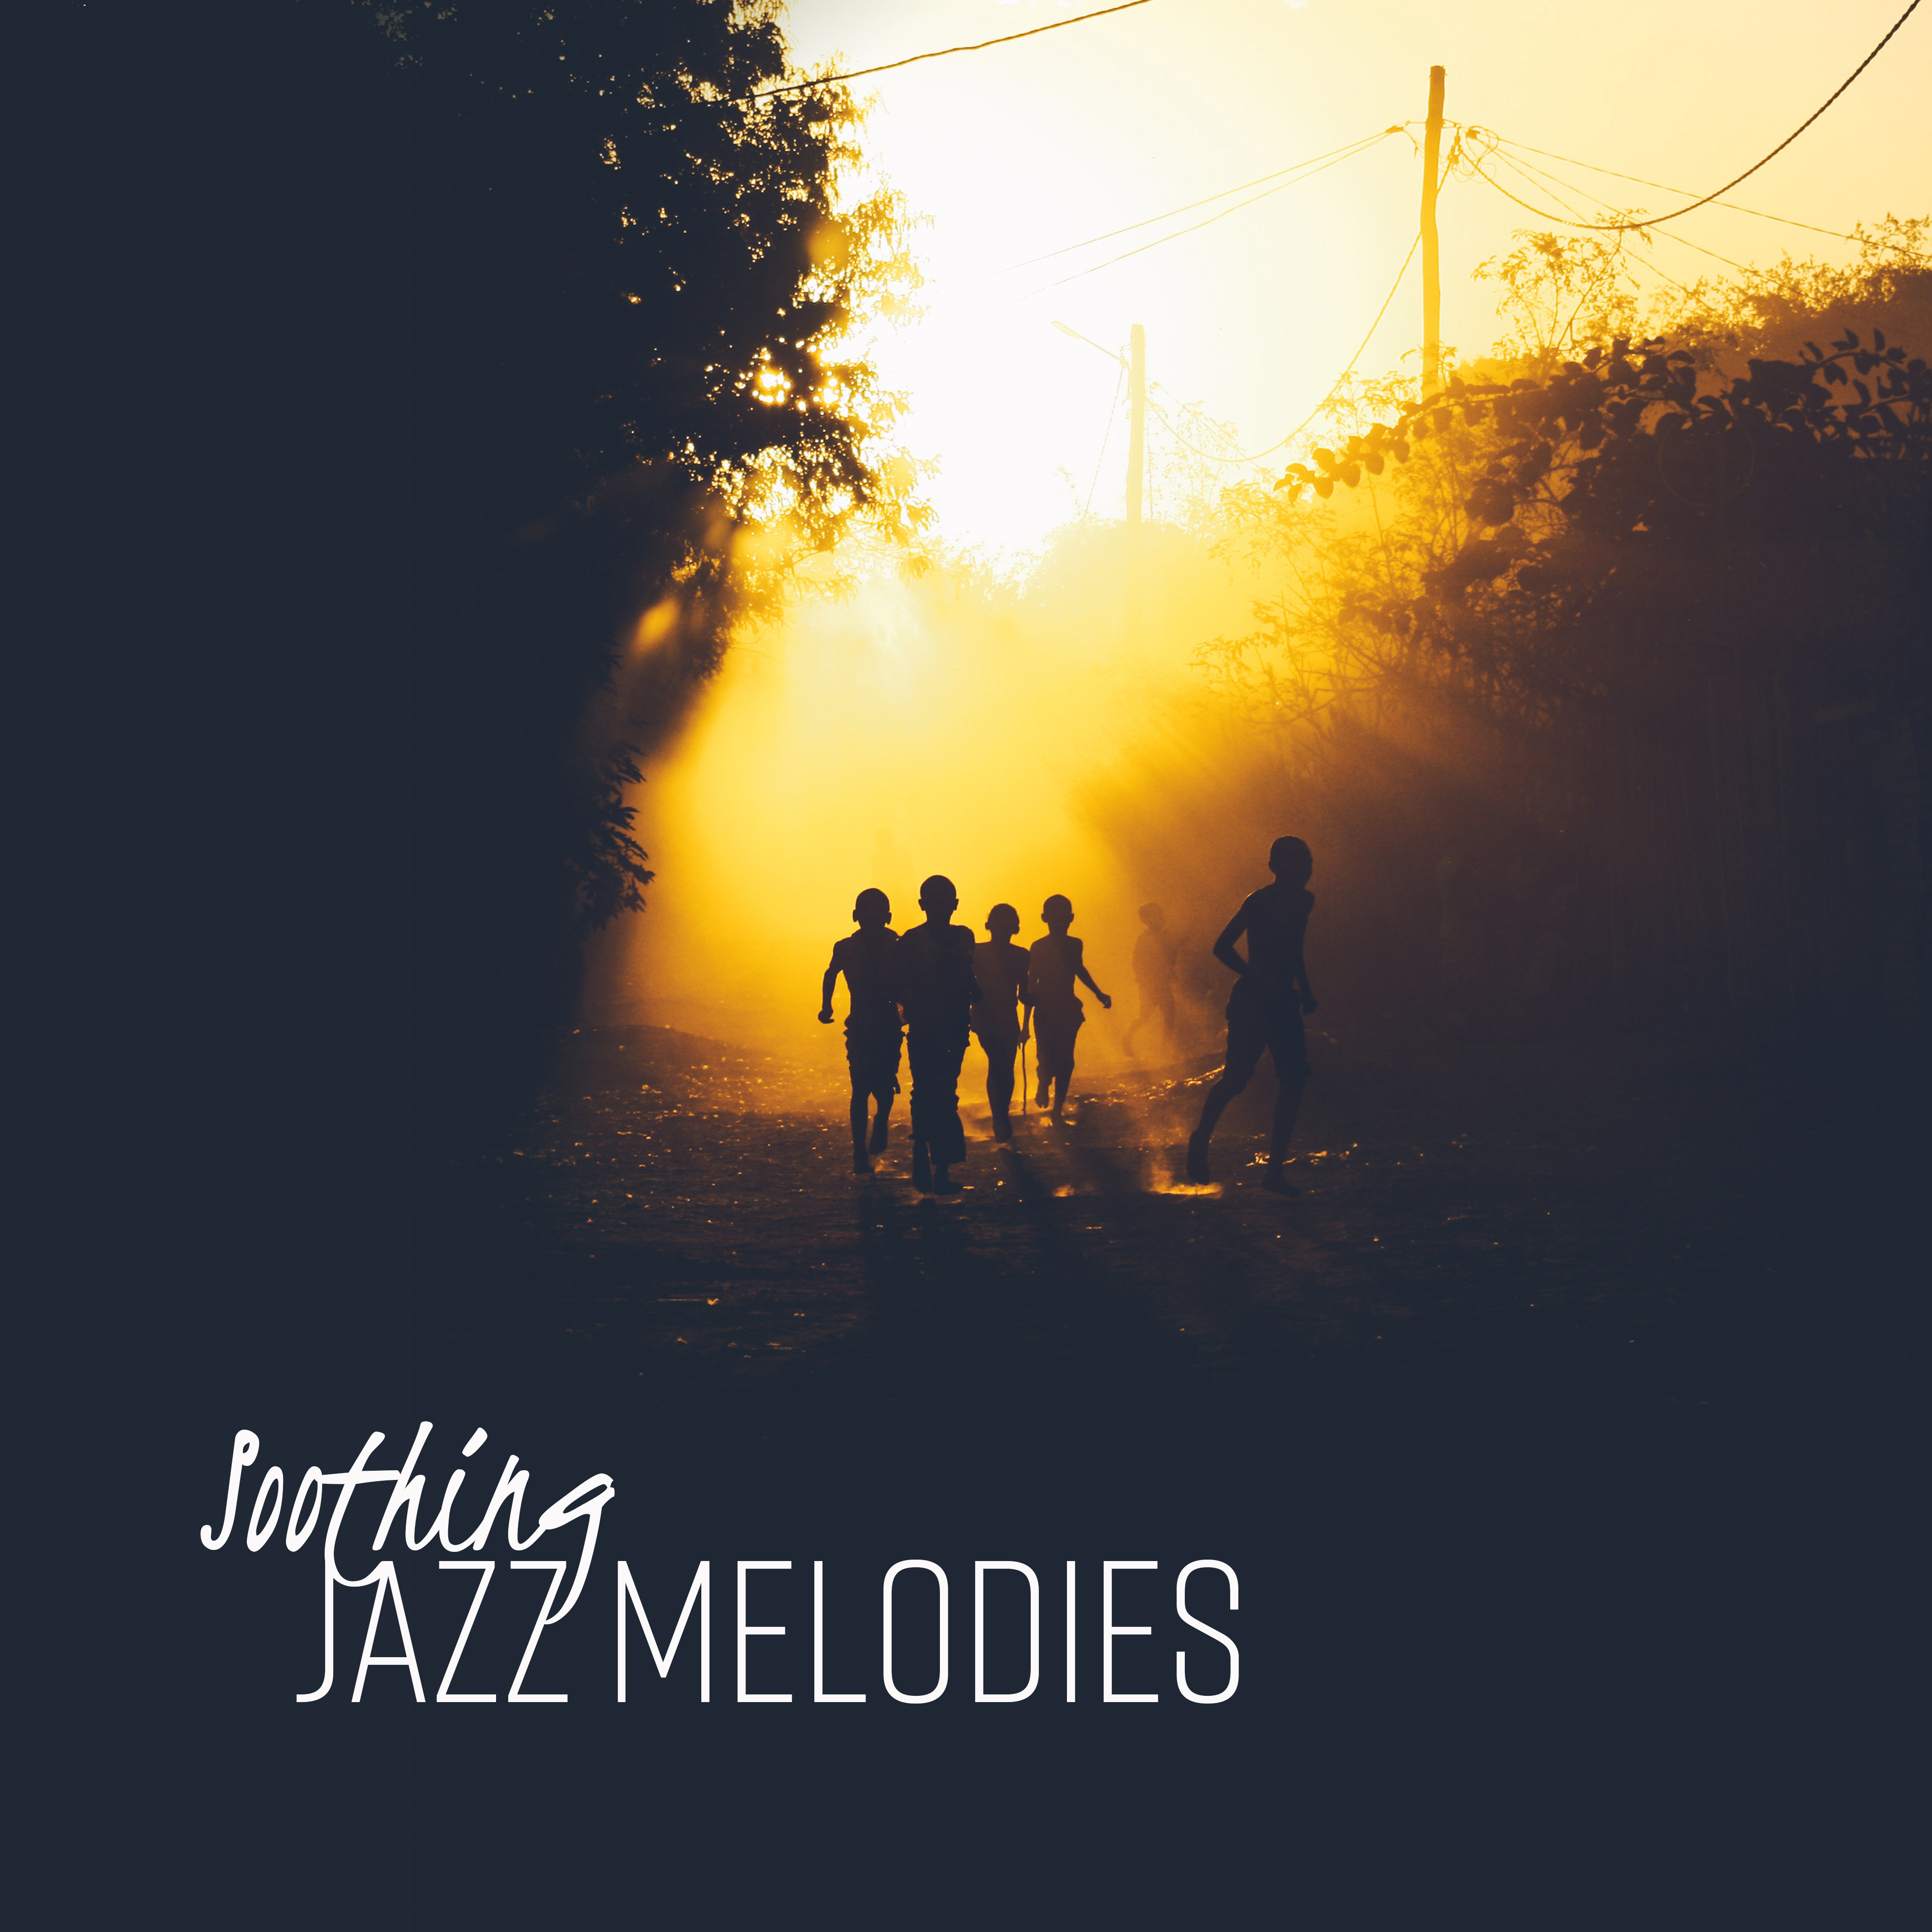 Soothing Jazz Melodies